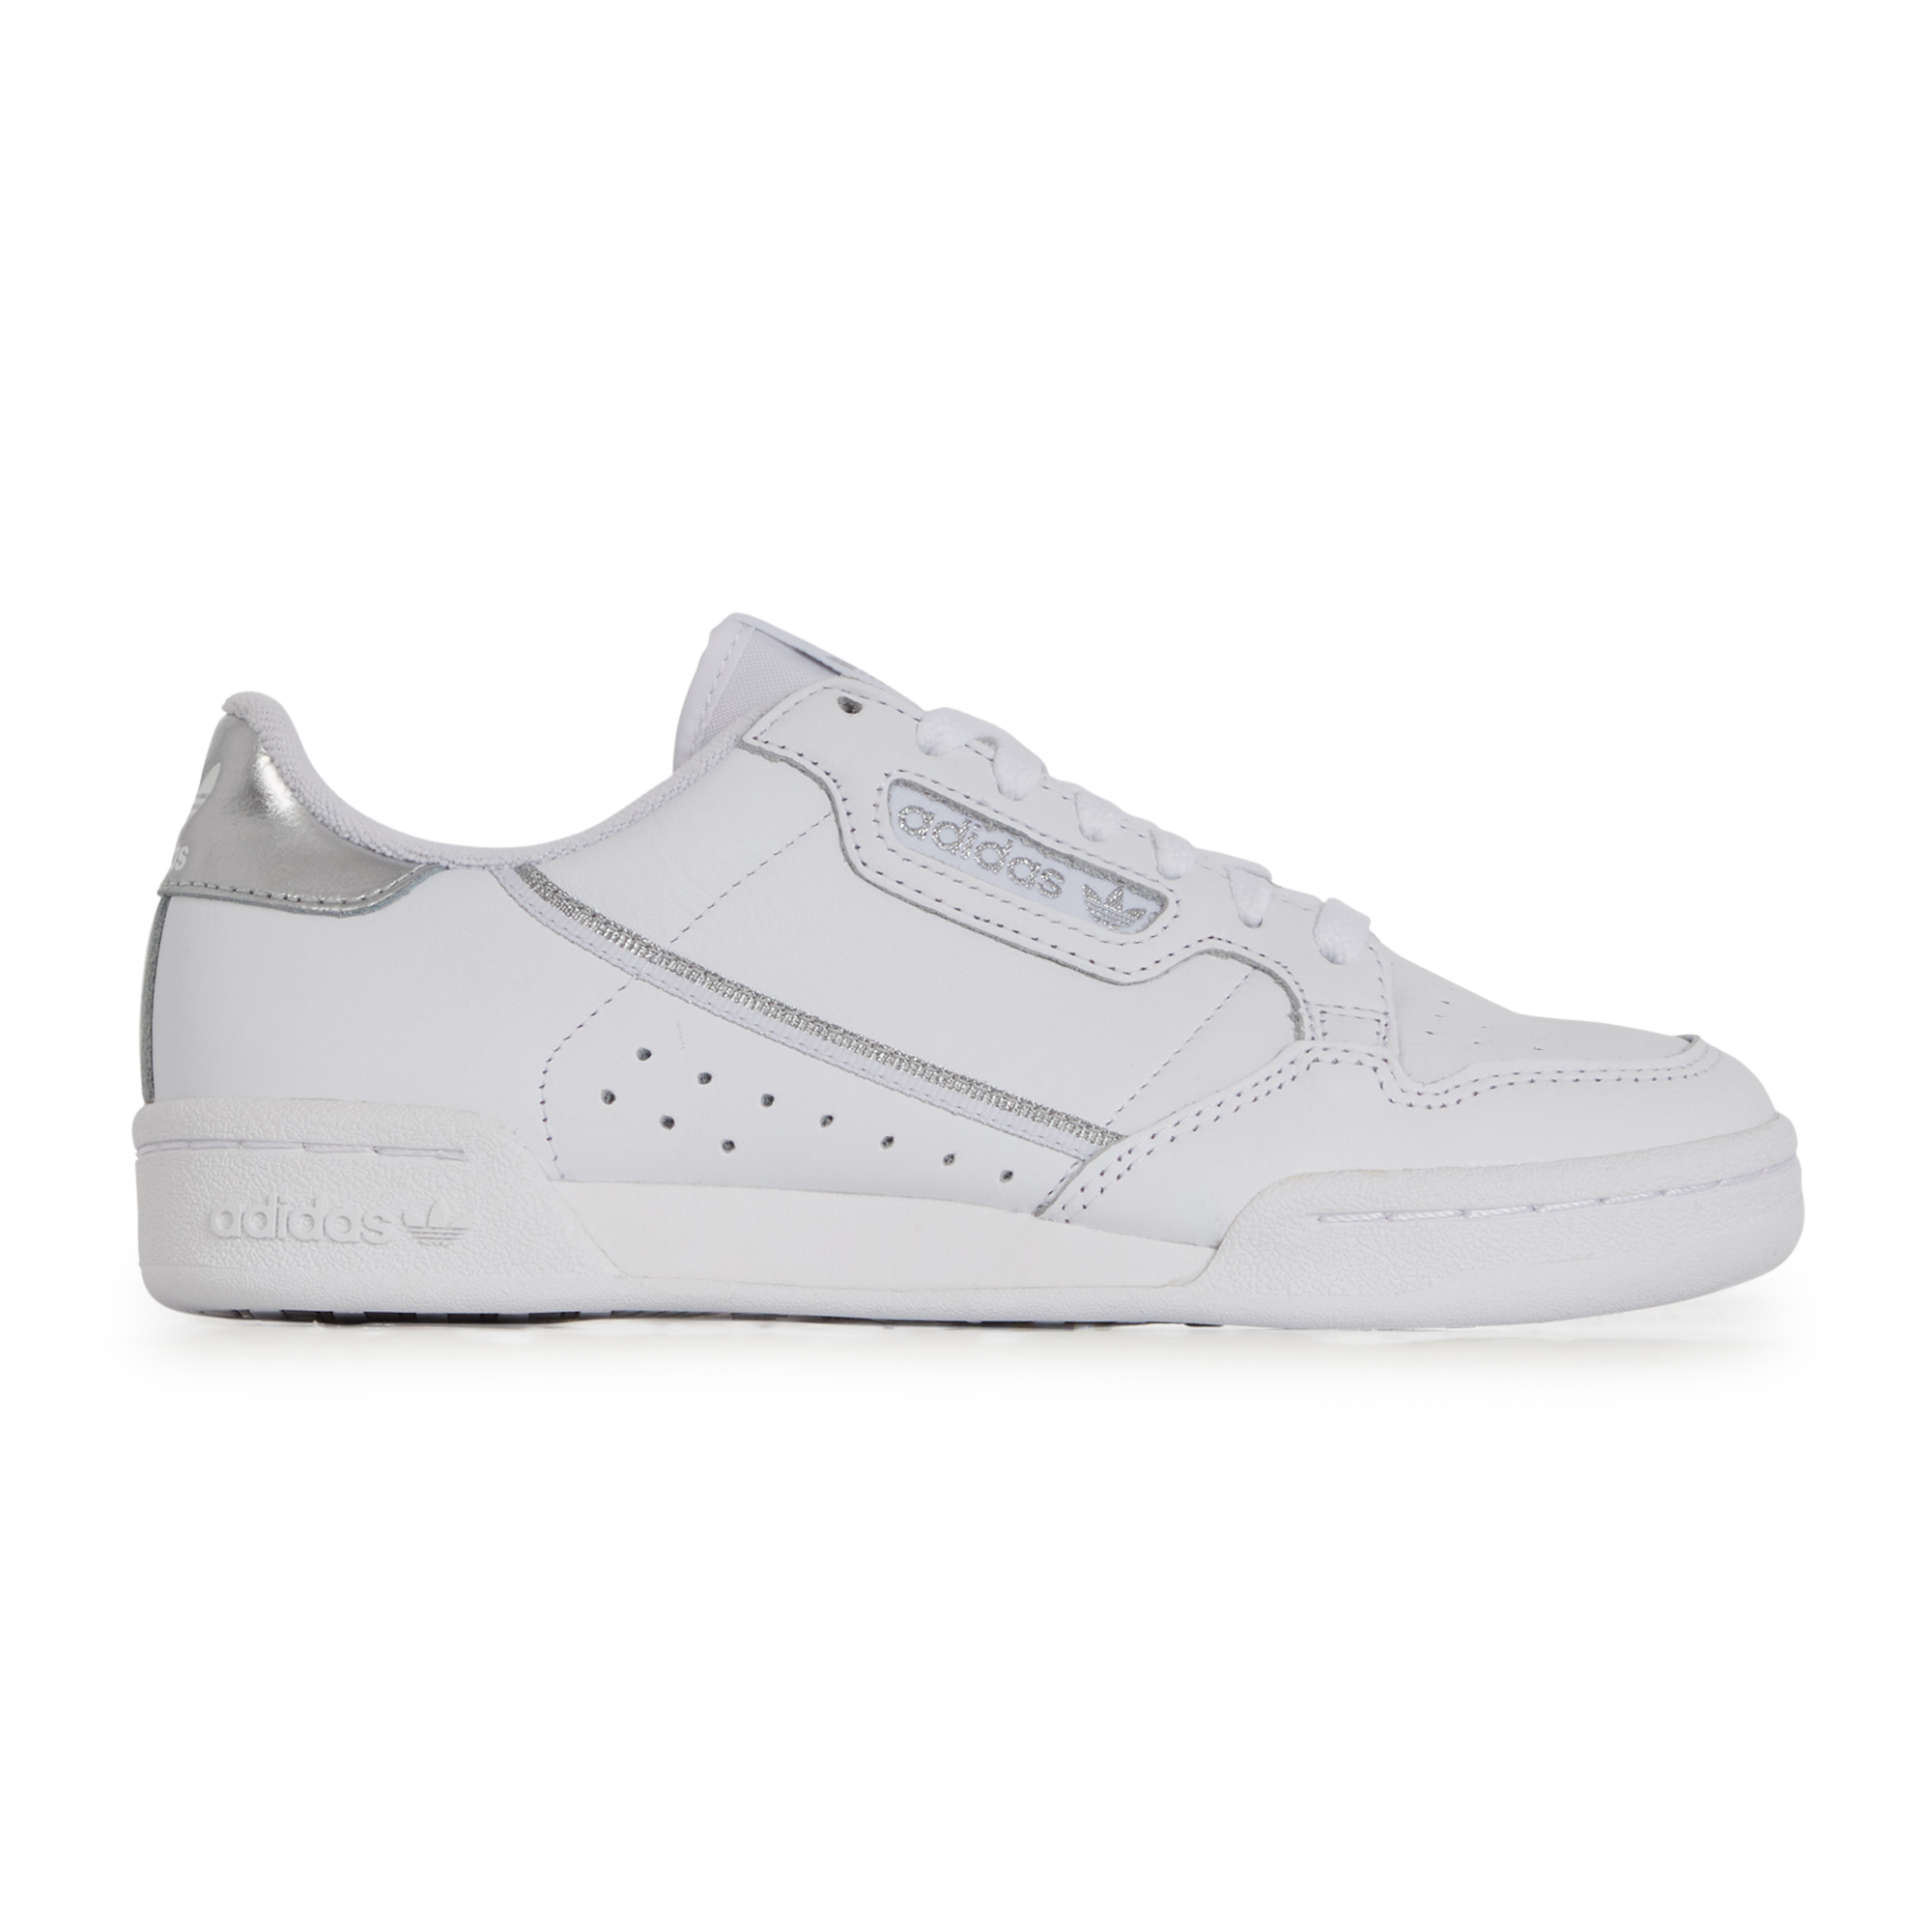 buy > adidas continental 80 femme blanche, Up to 67% OFF